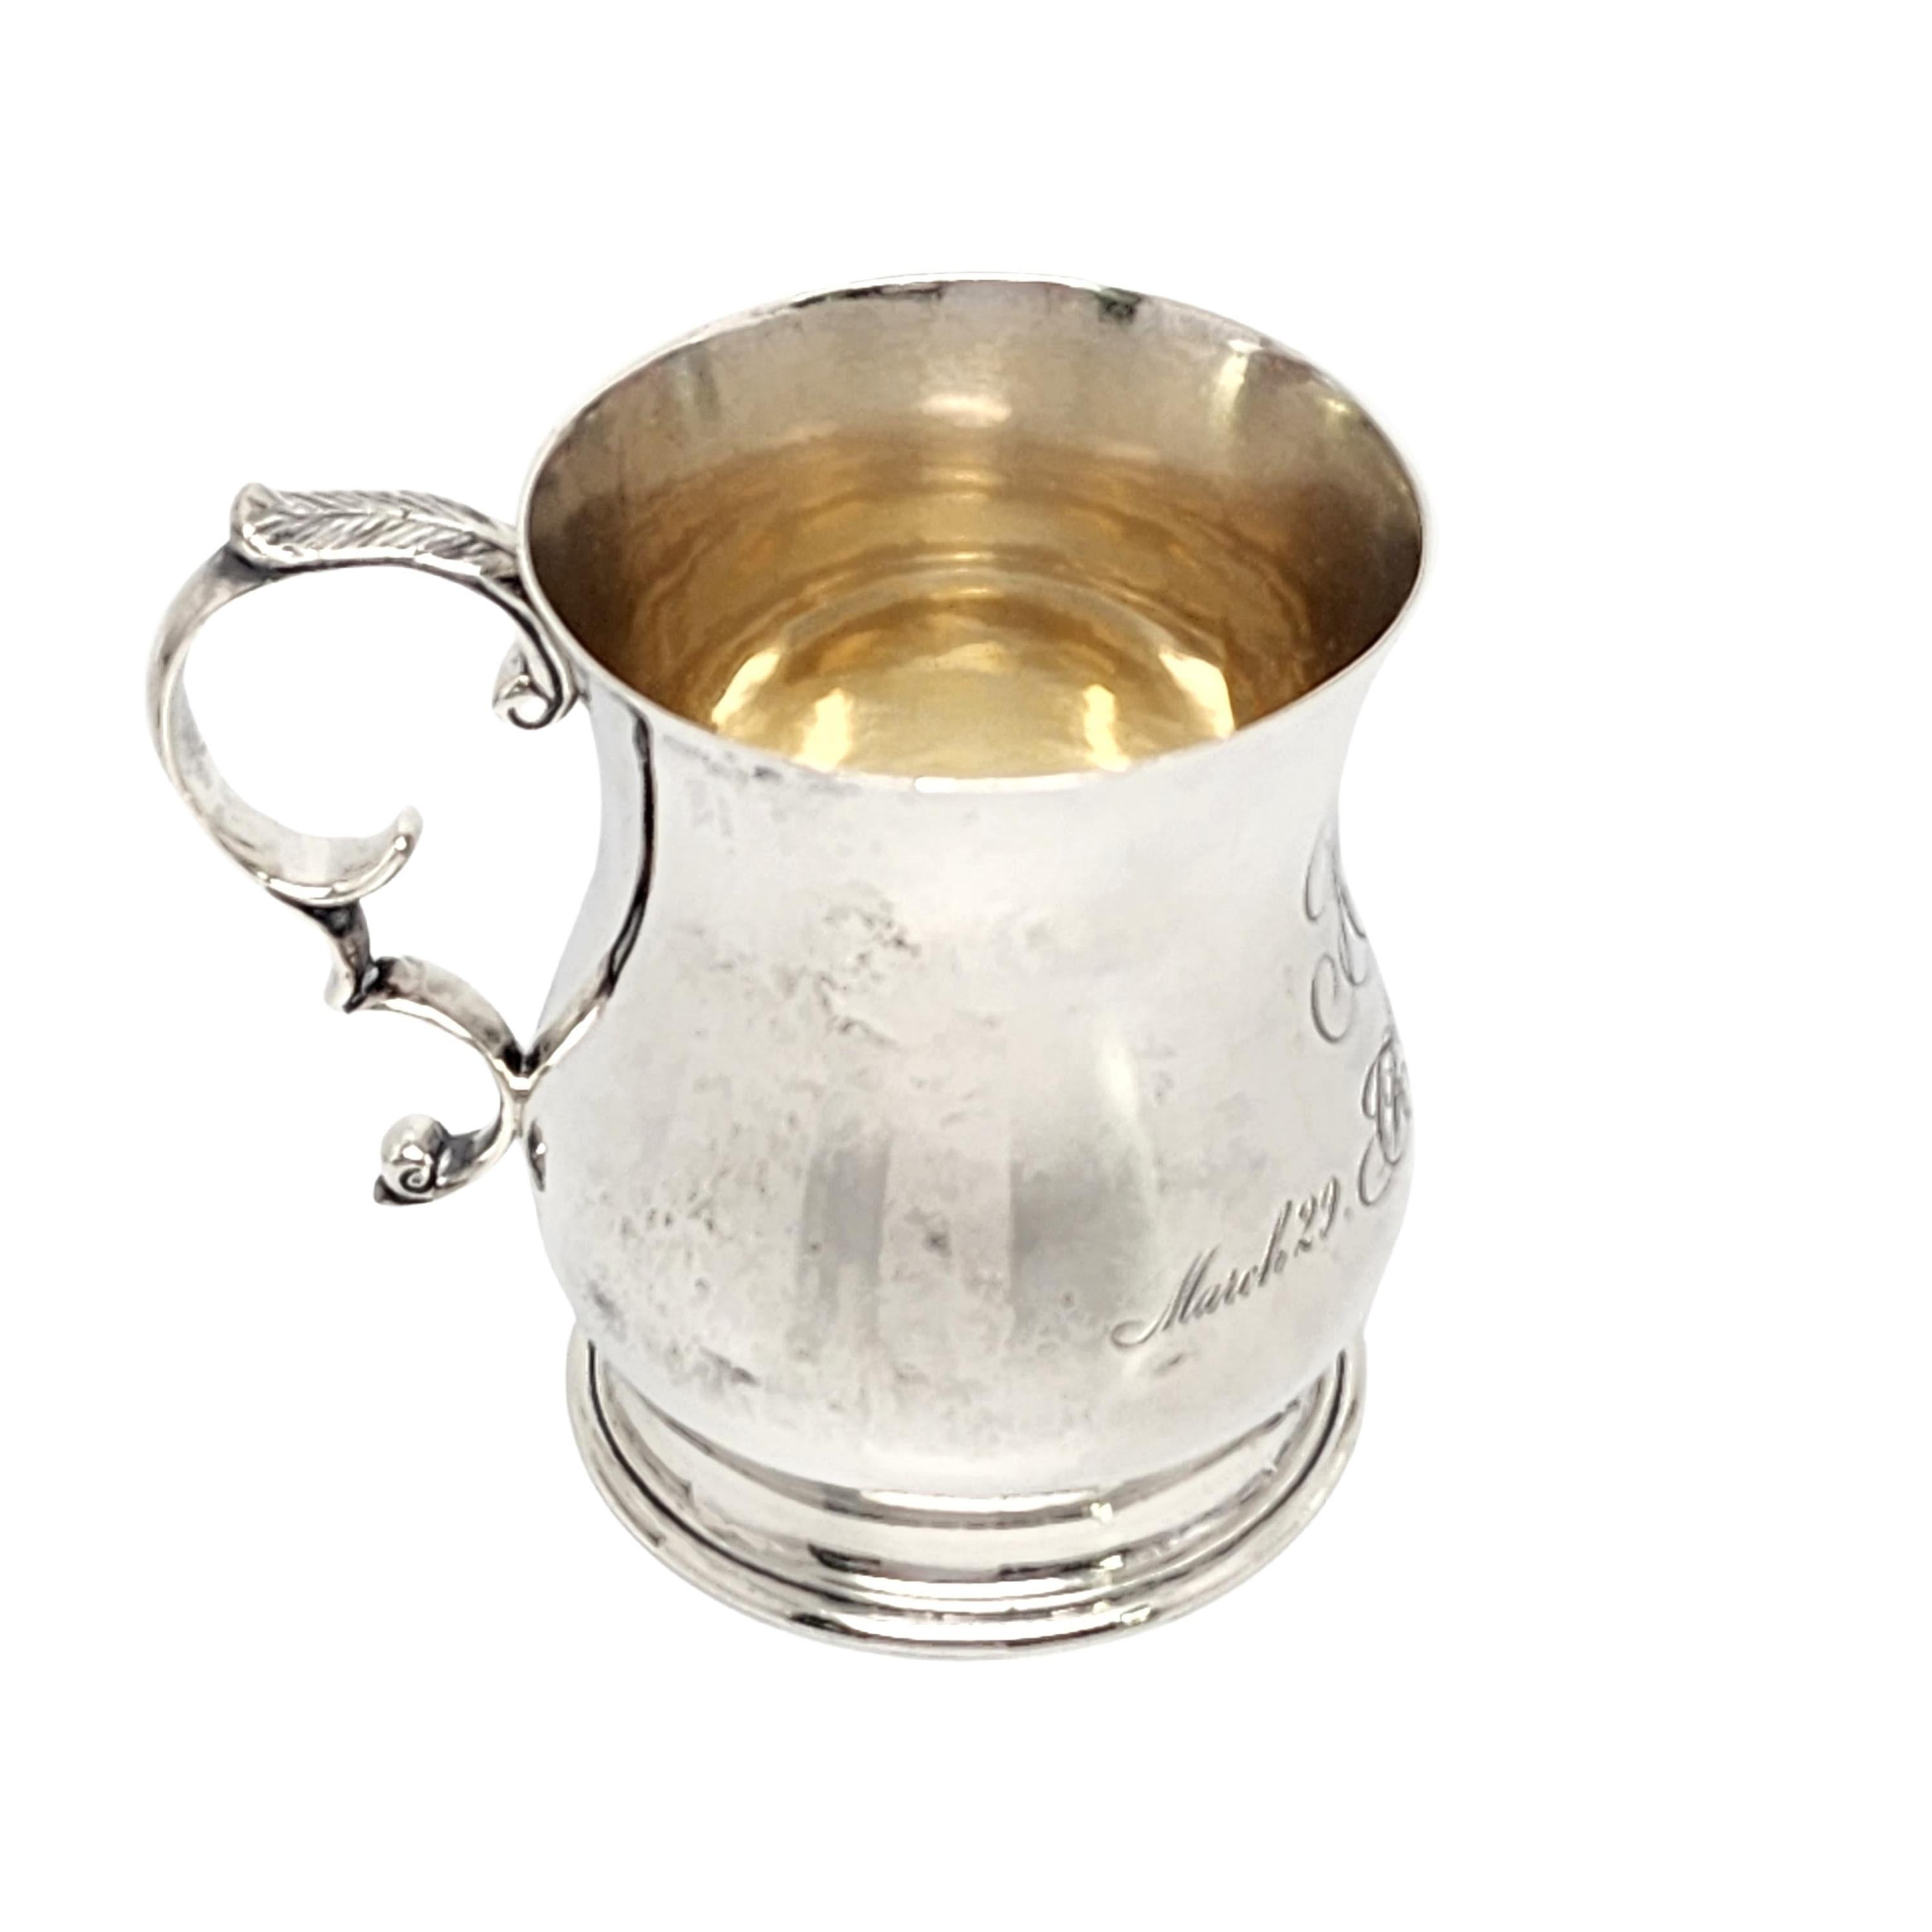 Women's Antique Tiffany & Co Sterling Silver Tankard Cup/Mug with Engraving #14894